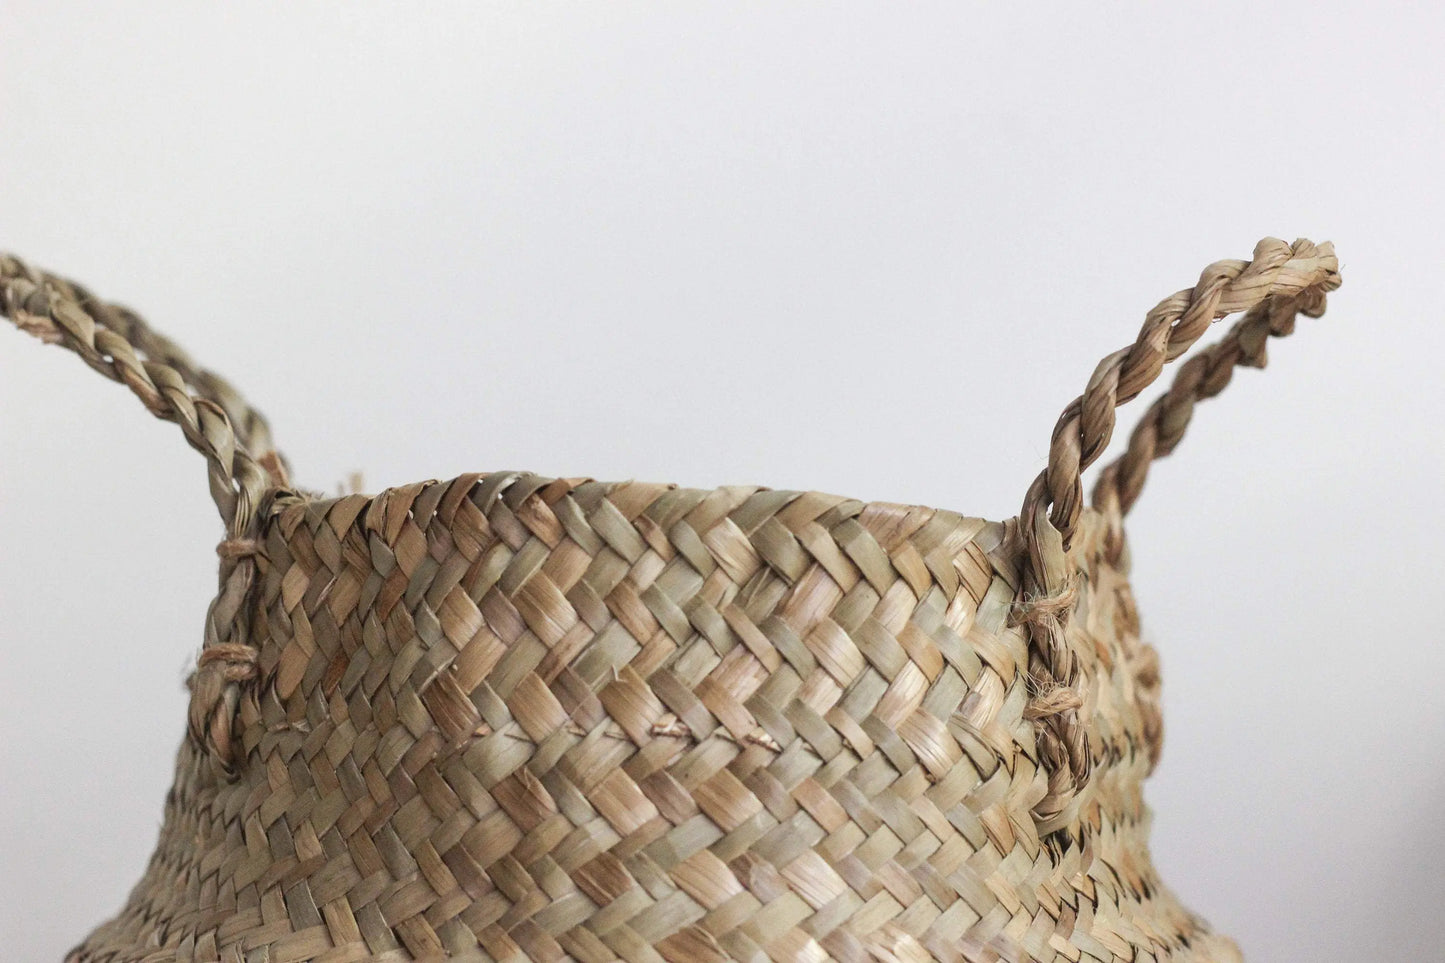 Woven Seagrass Belly Basket/Planter | 12"